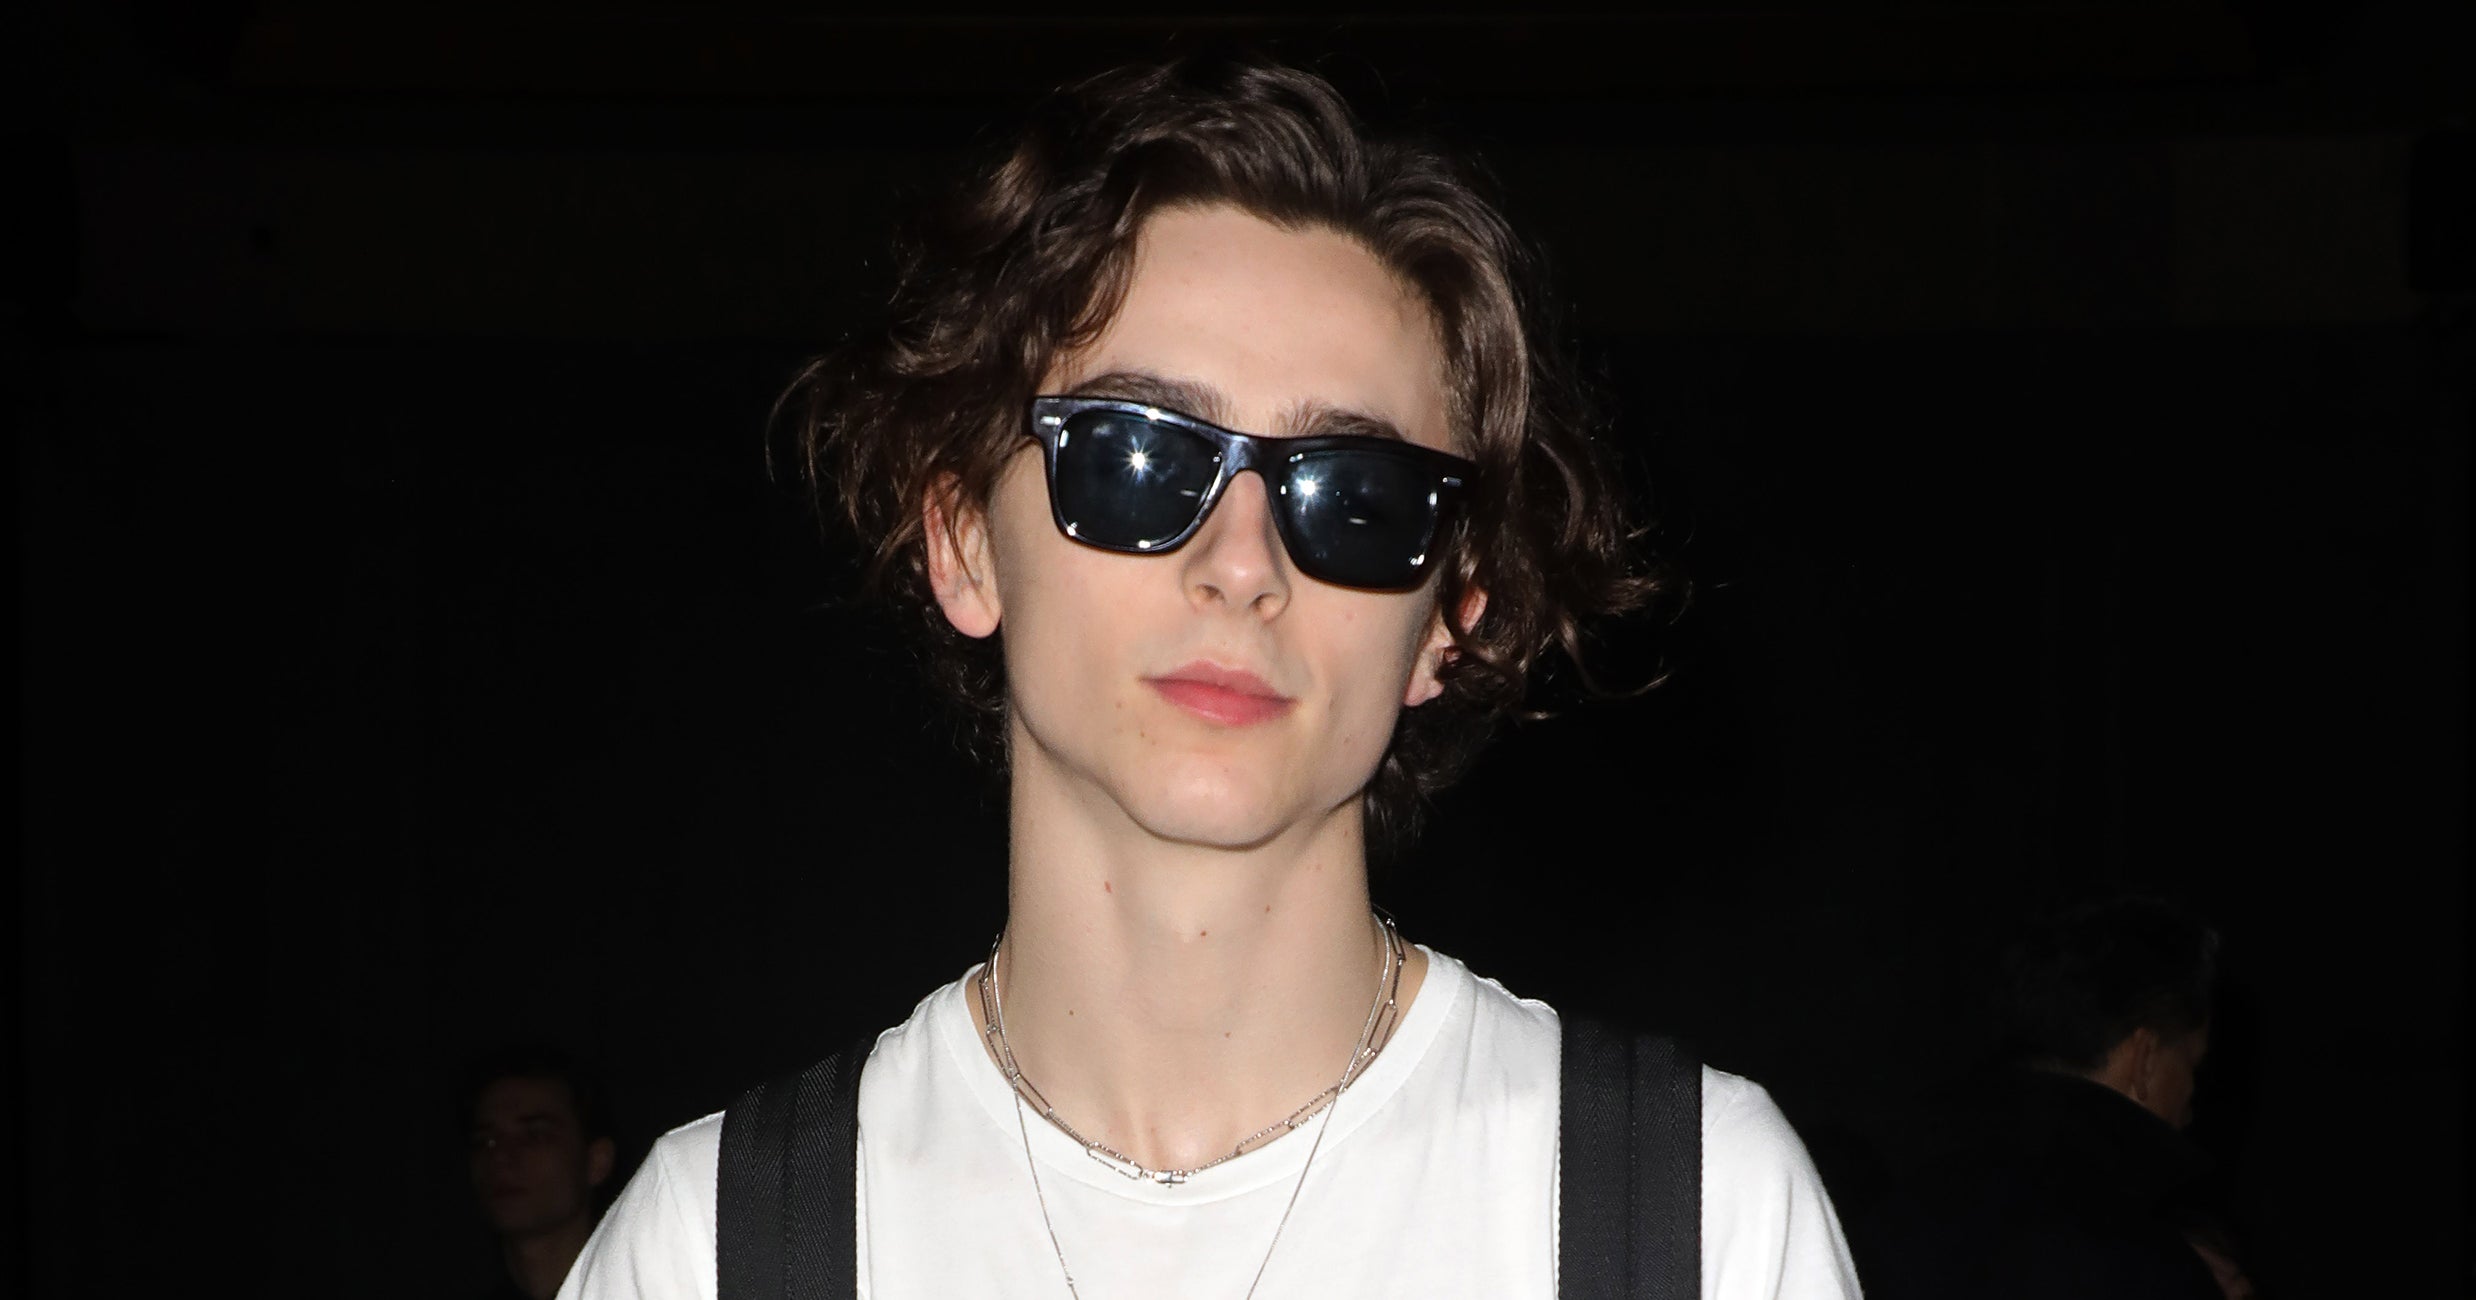 What You Don't Know About Timothée Chalamet